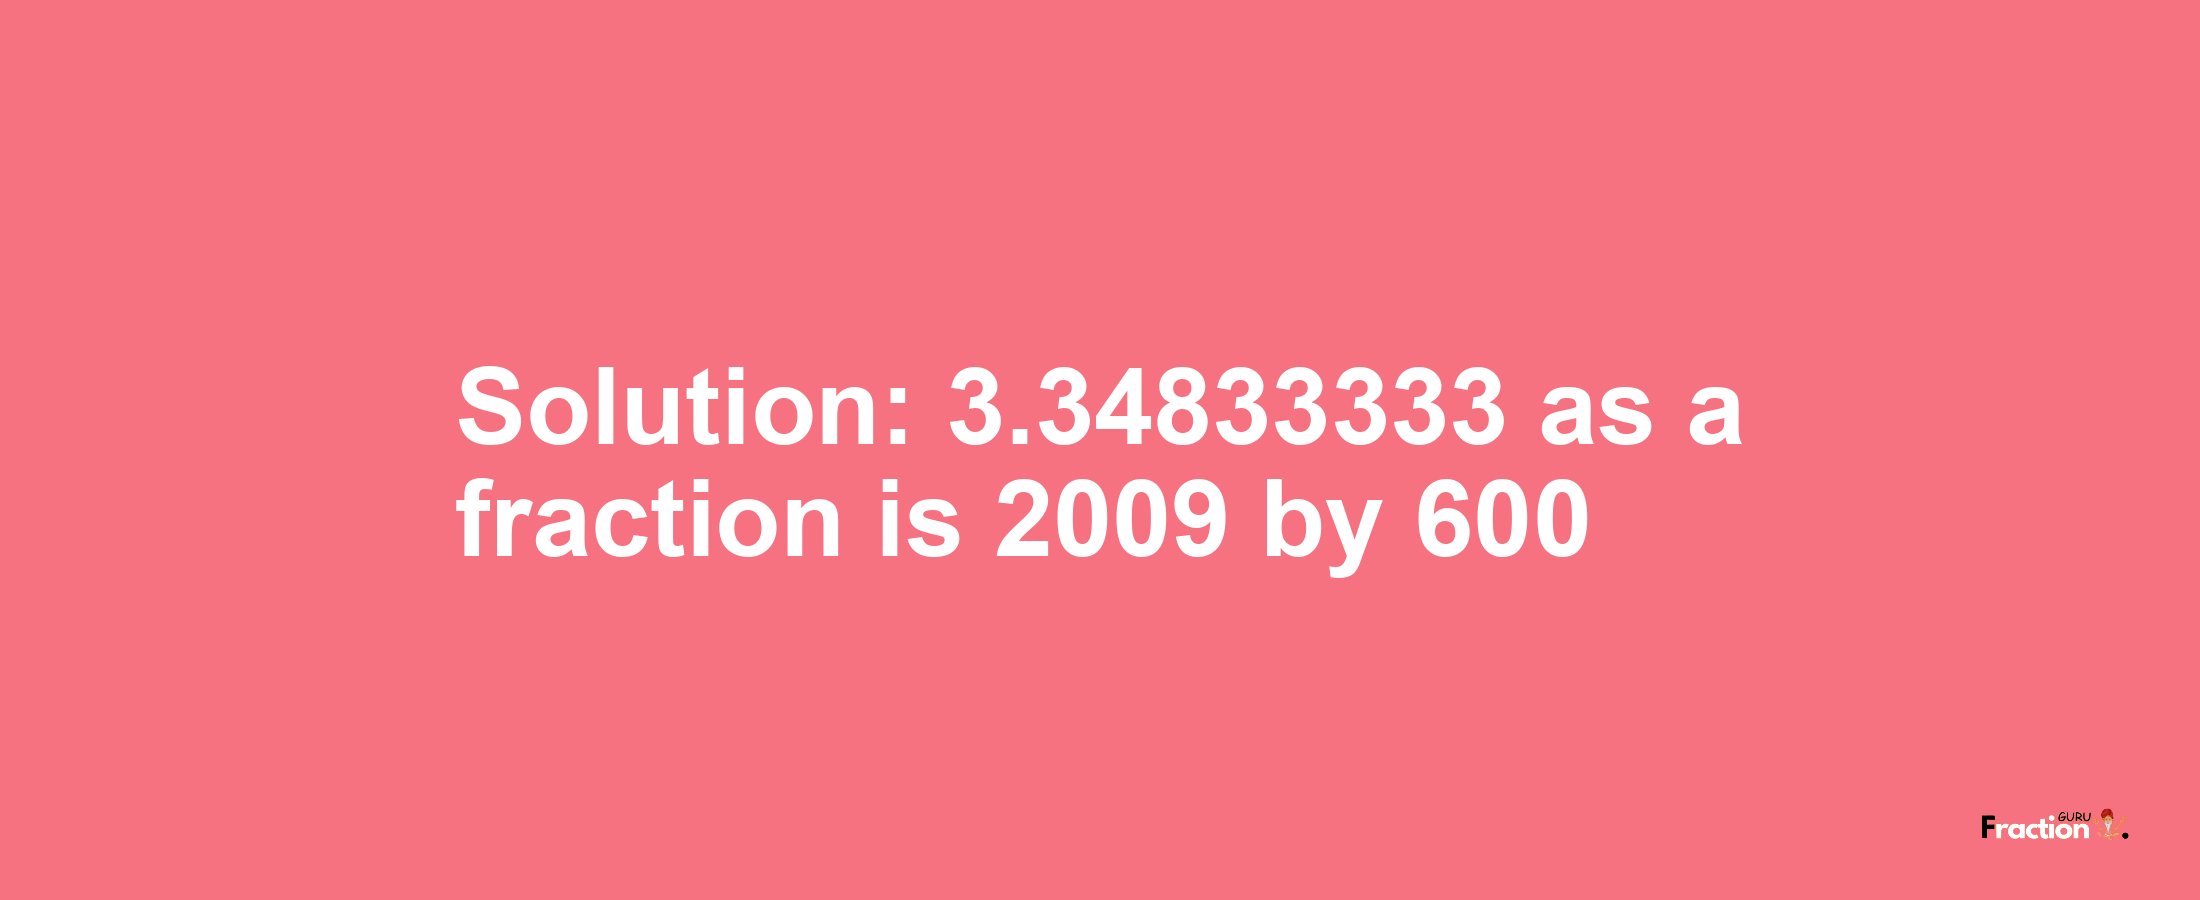 Solution:3.34833333 as a fraction is 2009/600